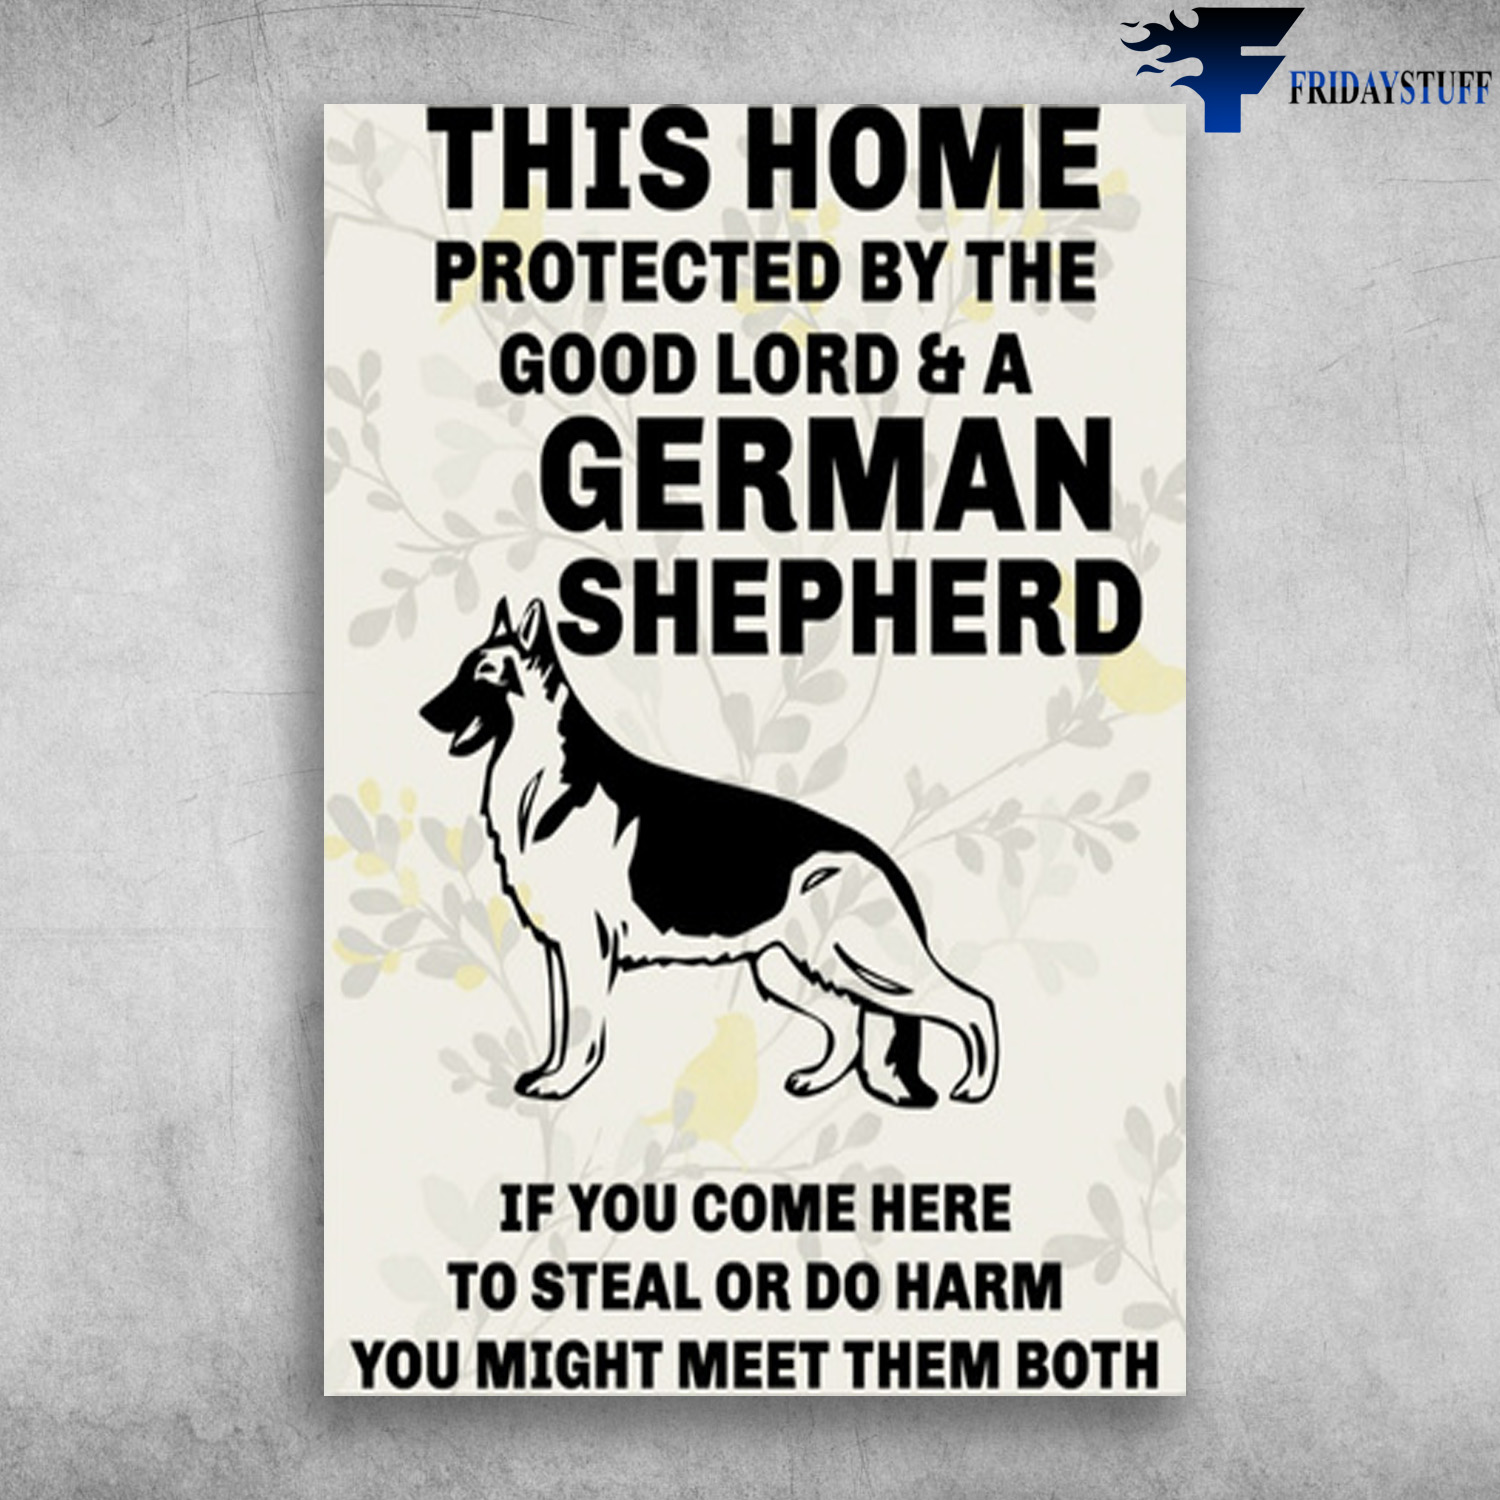 German Shepherd Dog - This Home is Protected By Lord and German Shepherd, If You Come Here To Sleal Or Do Harm, You Might Meet Them Both